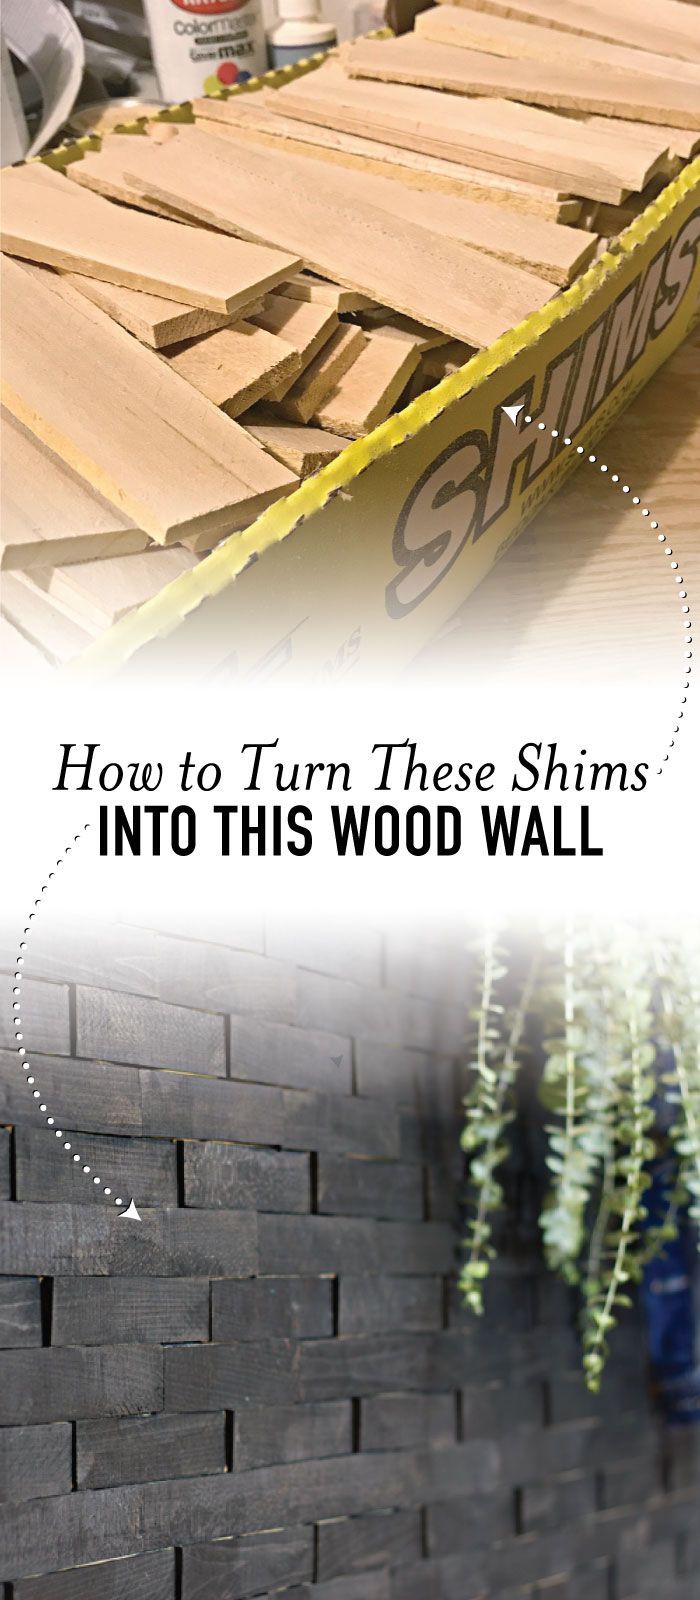 How to Create a Dramatic Wood Shims Wall